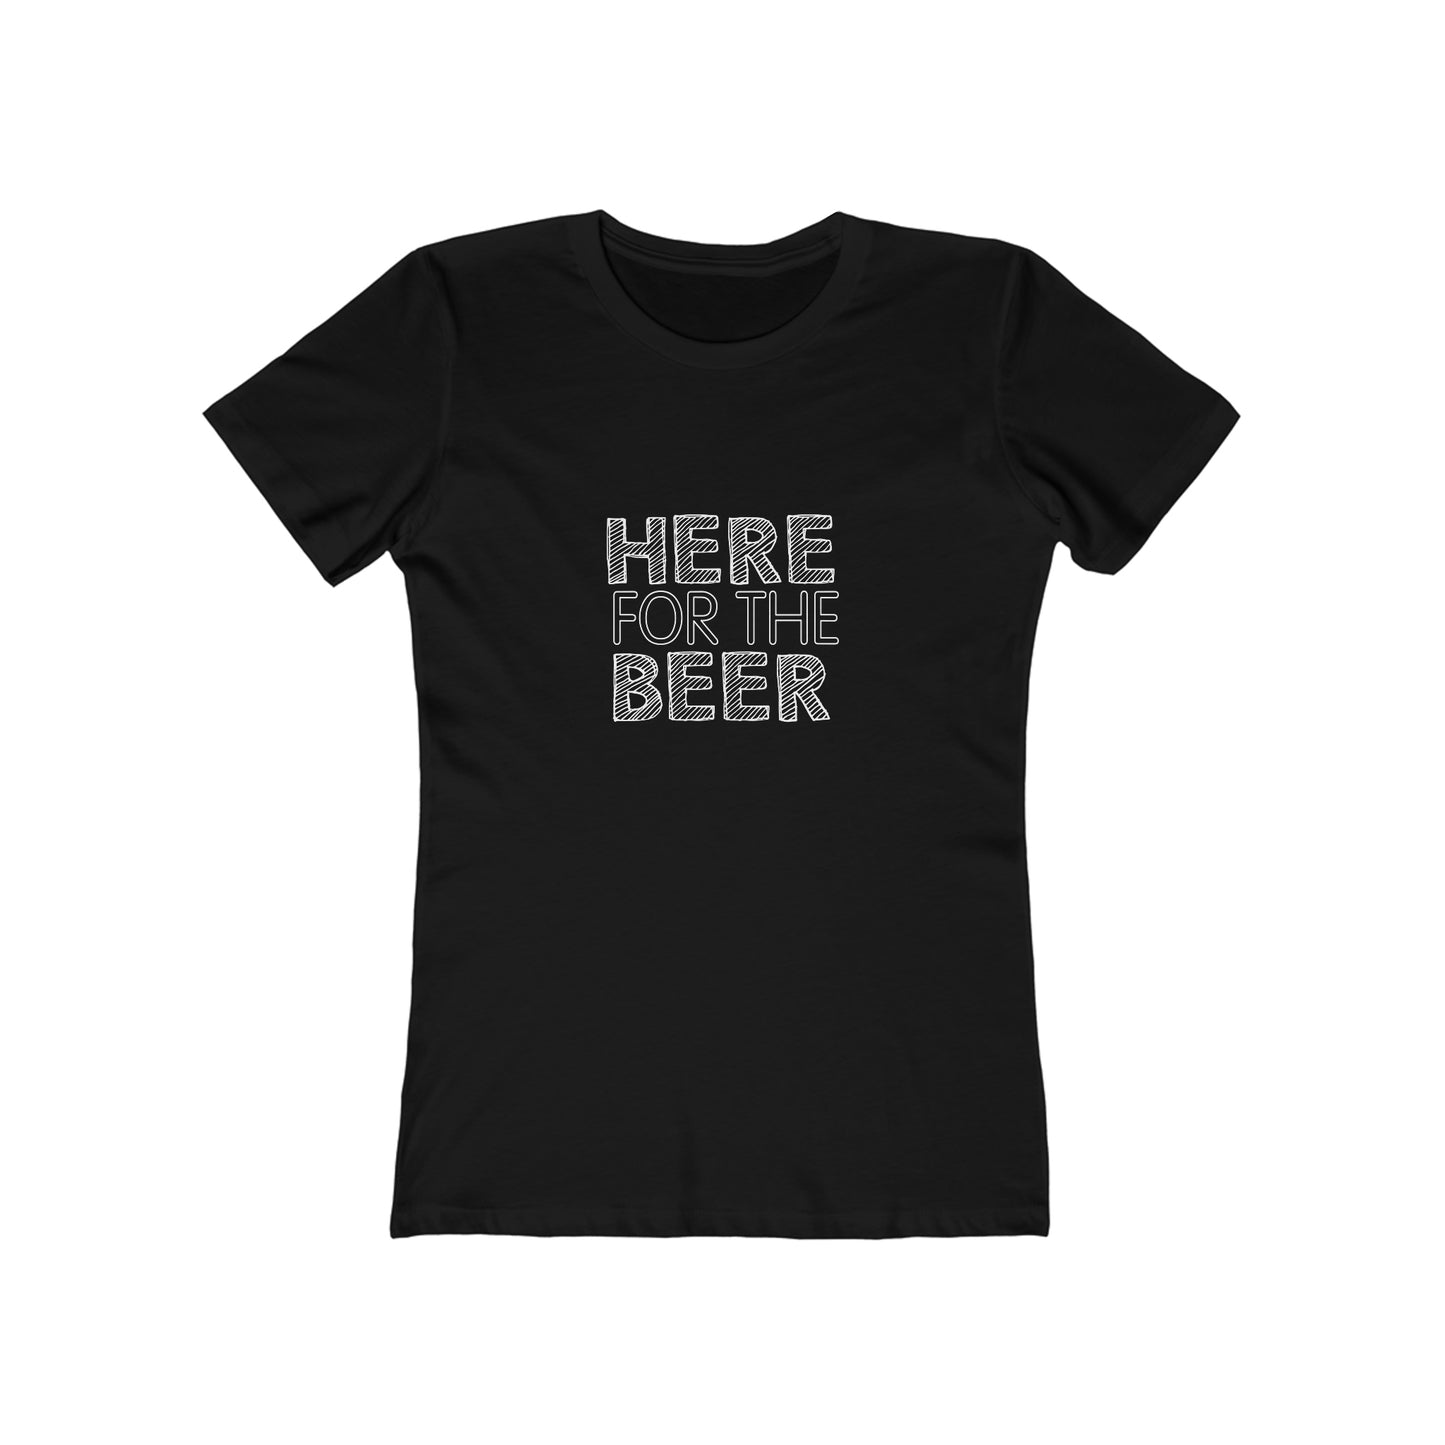 Here For The Beer - Women's T-shirt